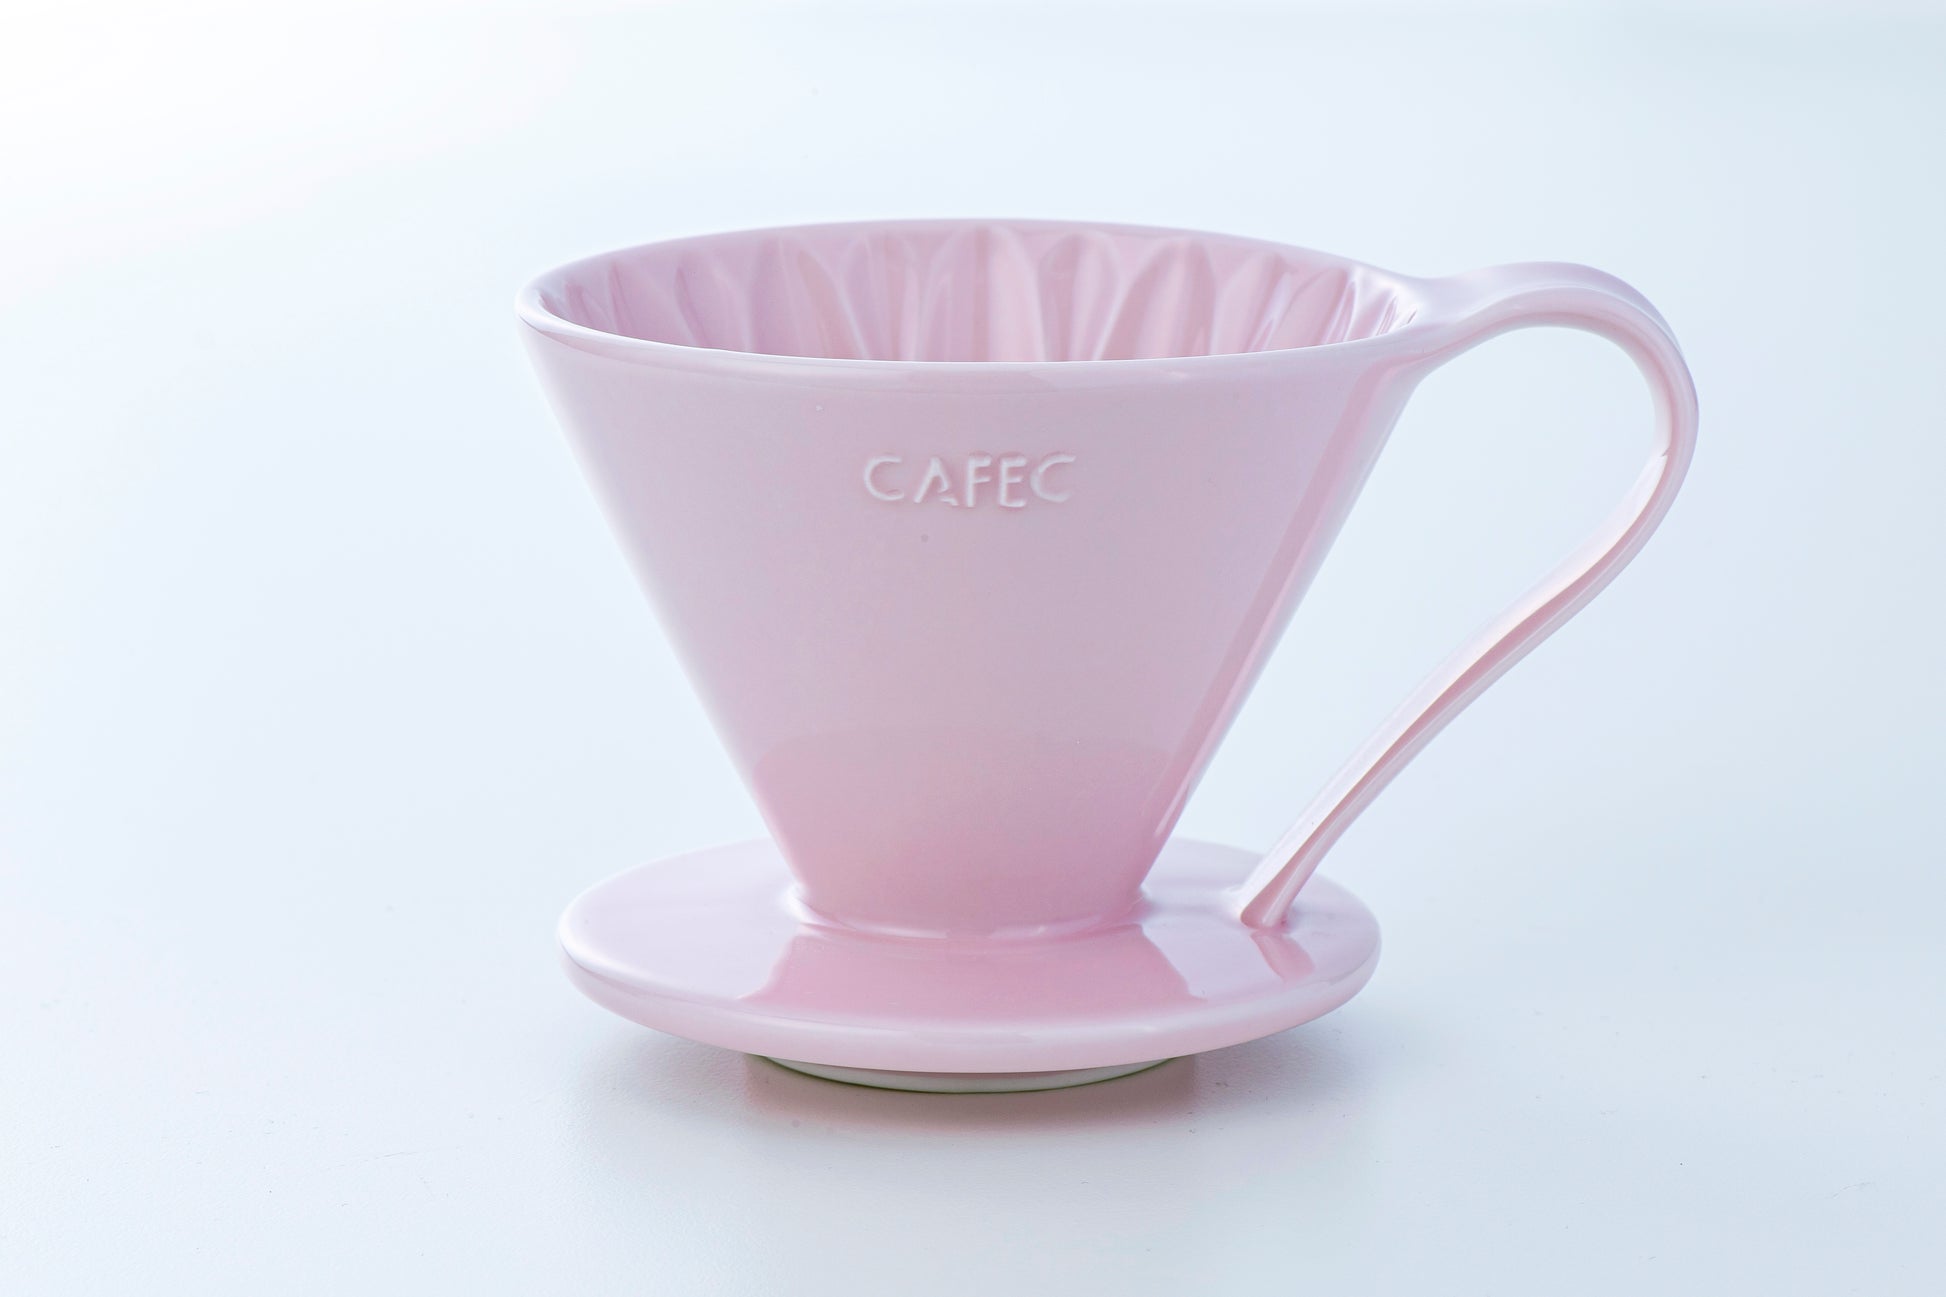 Cafec Flower dripper Cup-04 Cone-Shaped